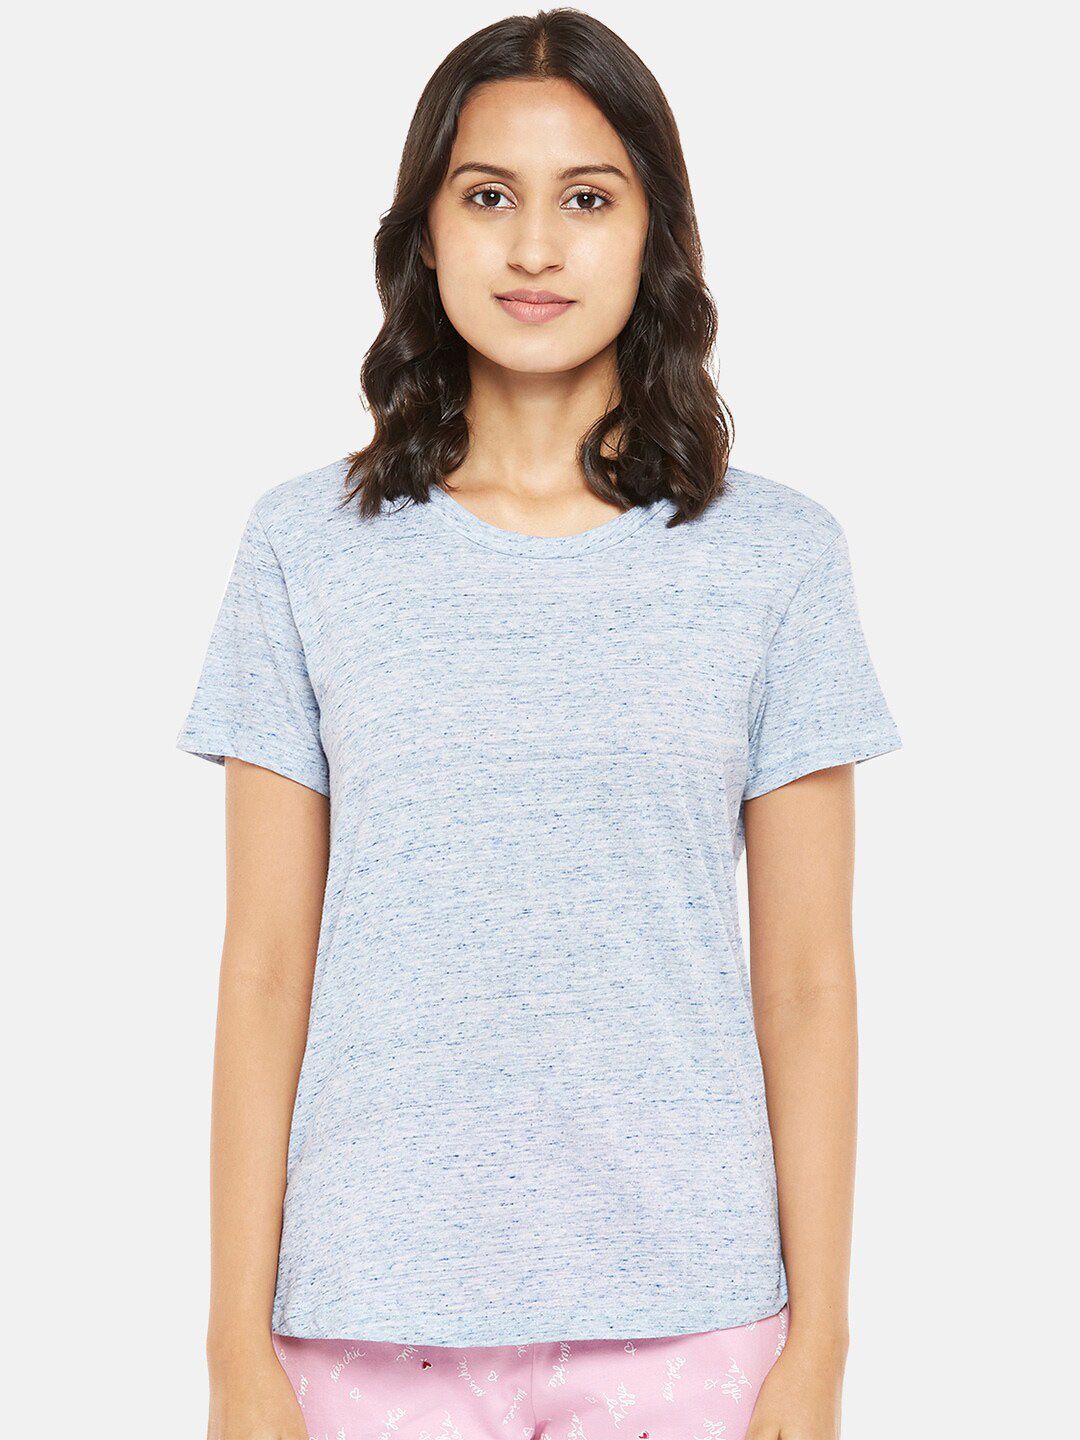 Dreamz by Pantaloons Blue Printed Pure Cotton Regular Lounge tshirt Price in India